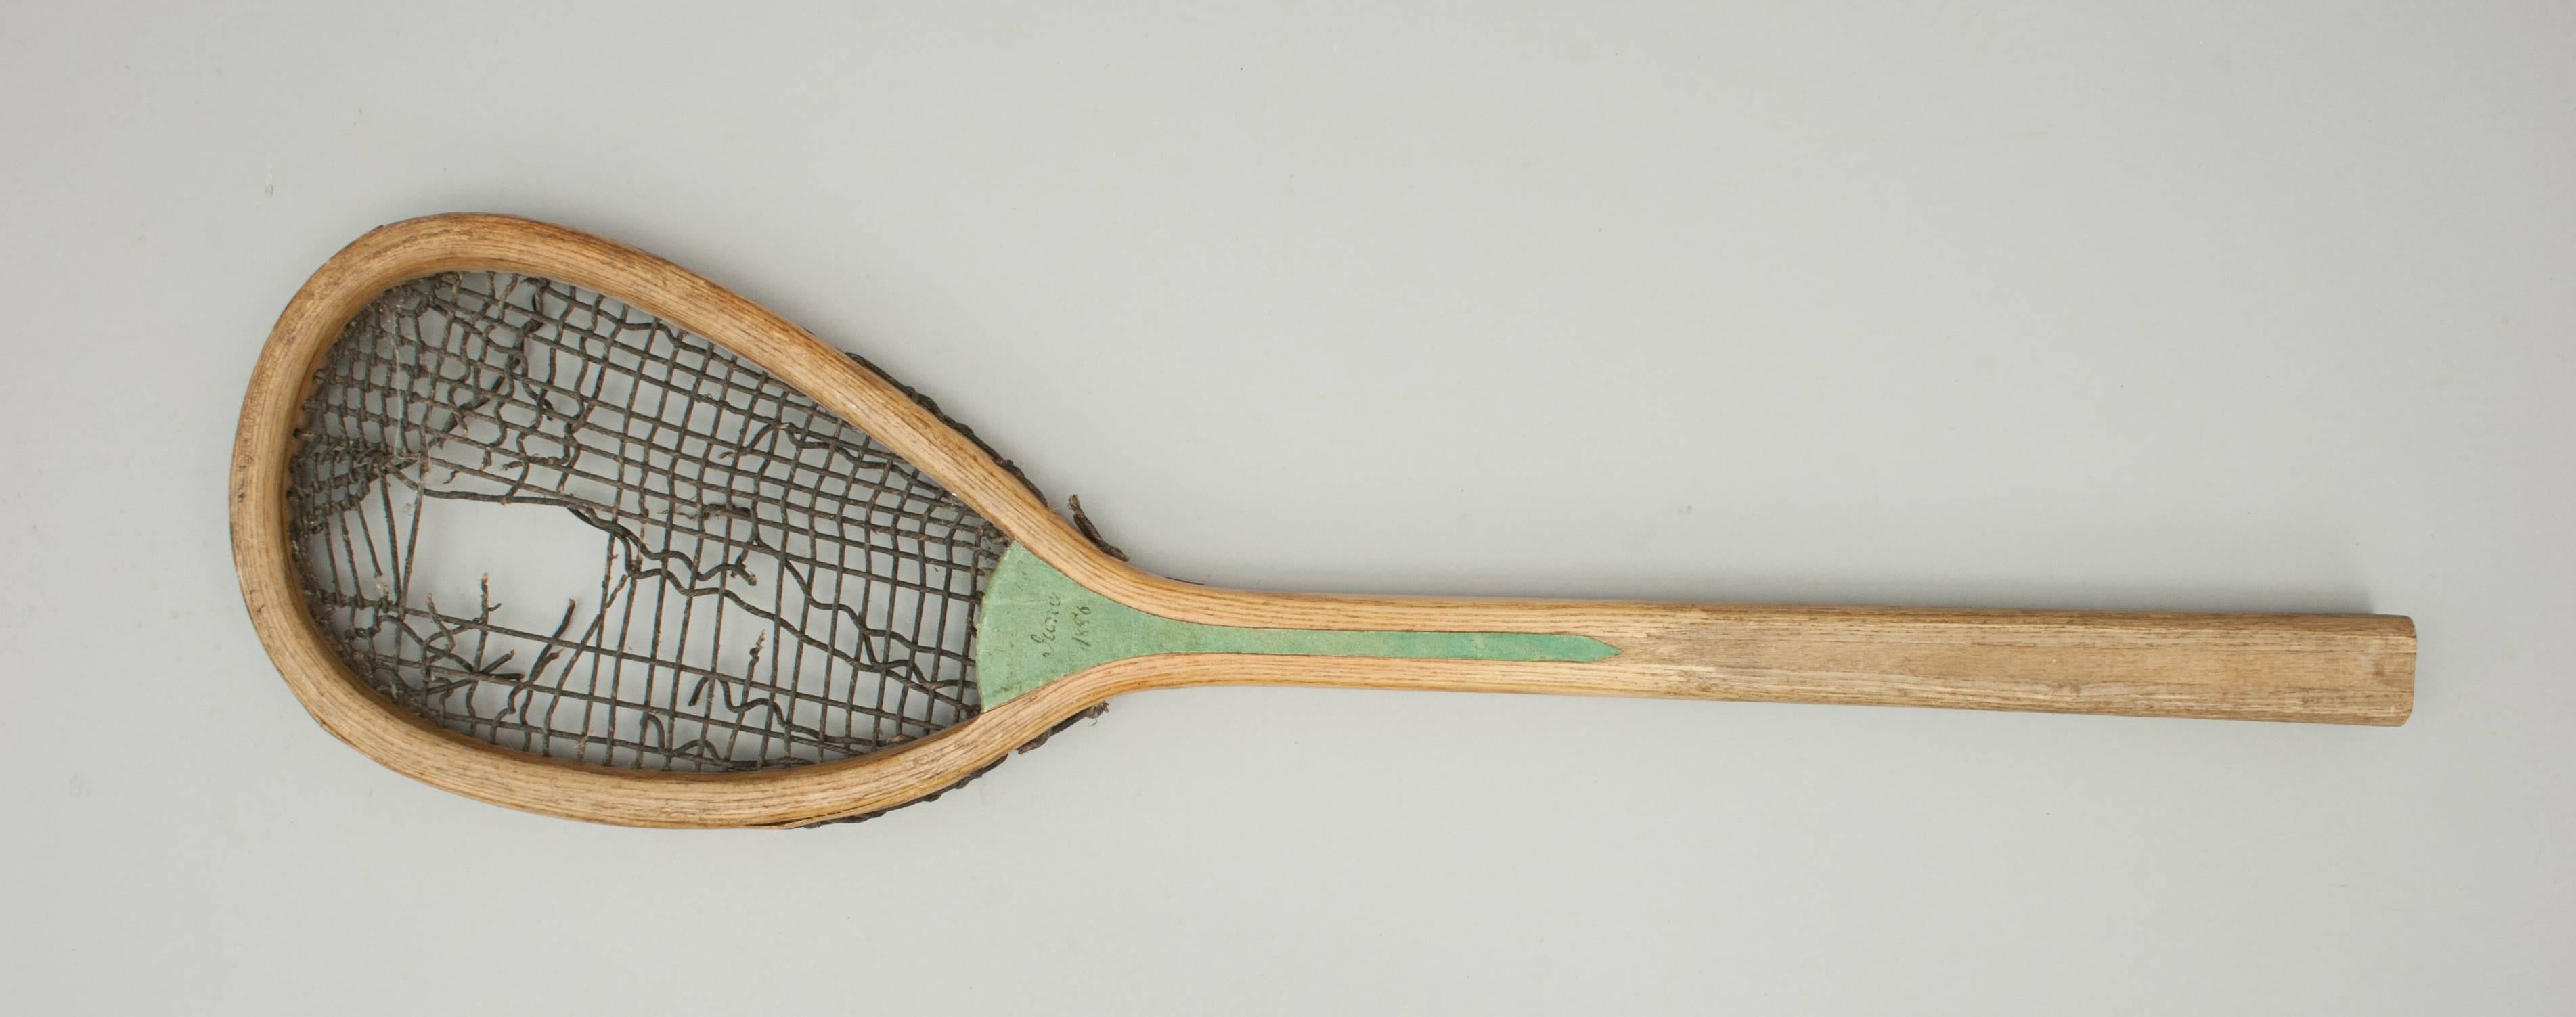 Real Tennis racket.
A rare real tennis racket, manufactured by Brouaye, France, with the original black, course gut stringing. The head of this ash racquet is stamped 'BROUAYE', the convex wedge is covered in green material with one side dated